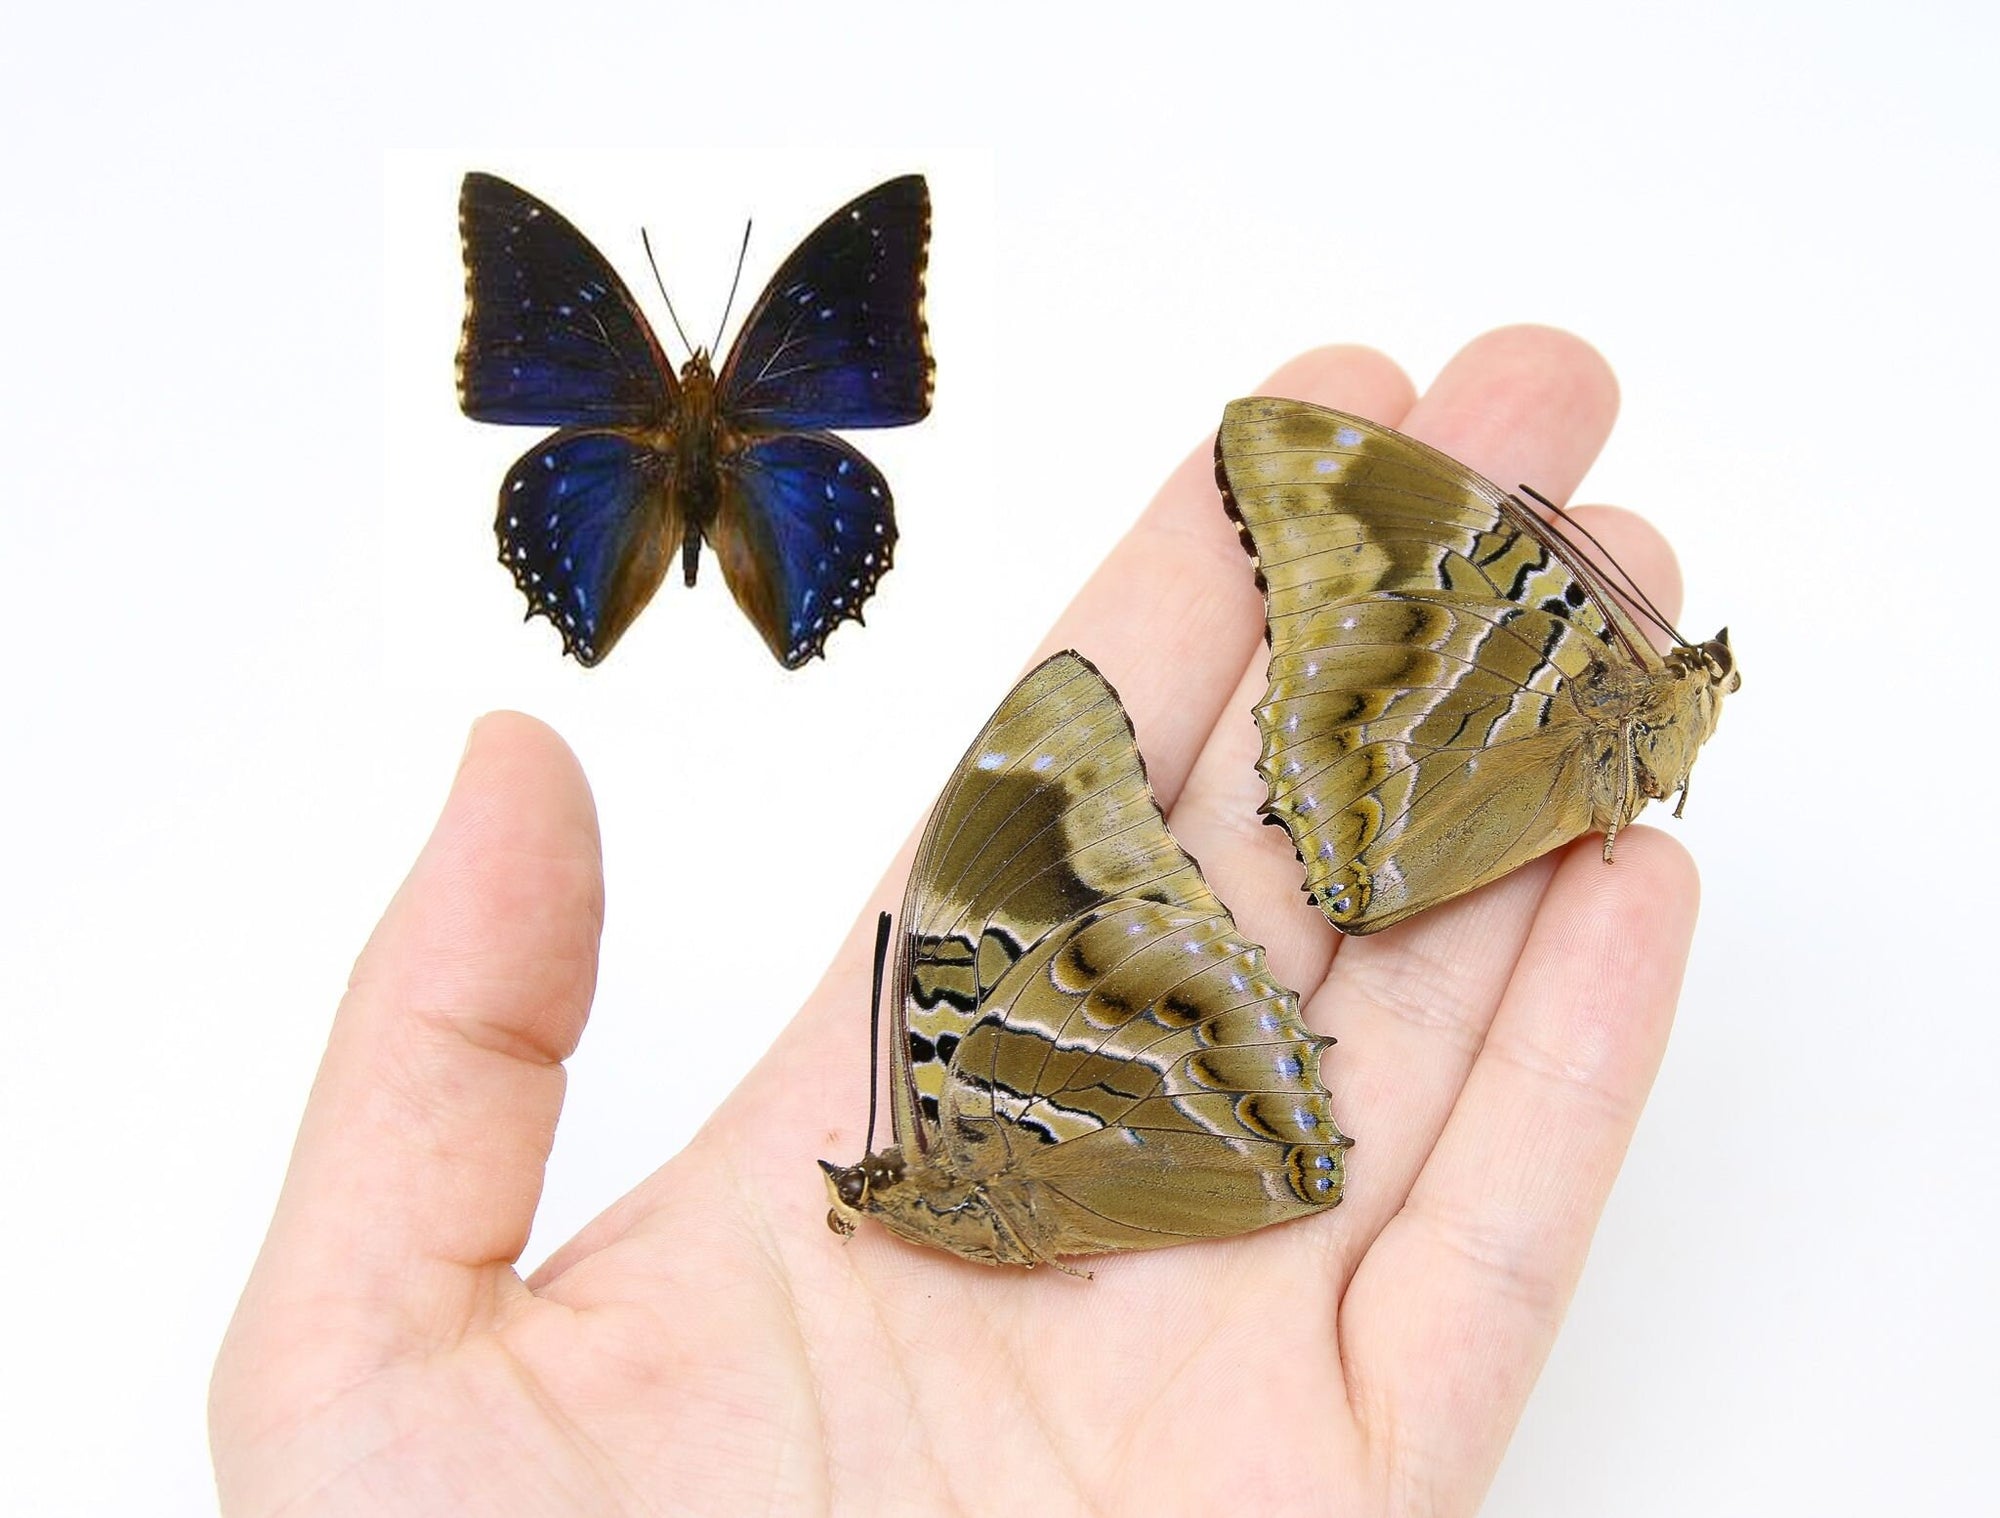 Two (2) Charaxes numenes, "Lesser Blue Charaxes" A1 Real Dry-Preserved Butterflies, Unmounted Entomology Taxidermy Specimens